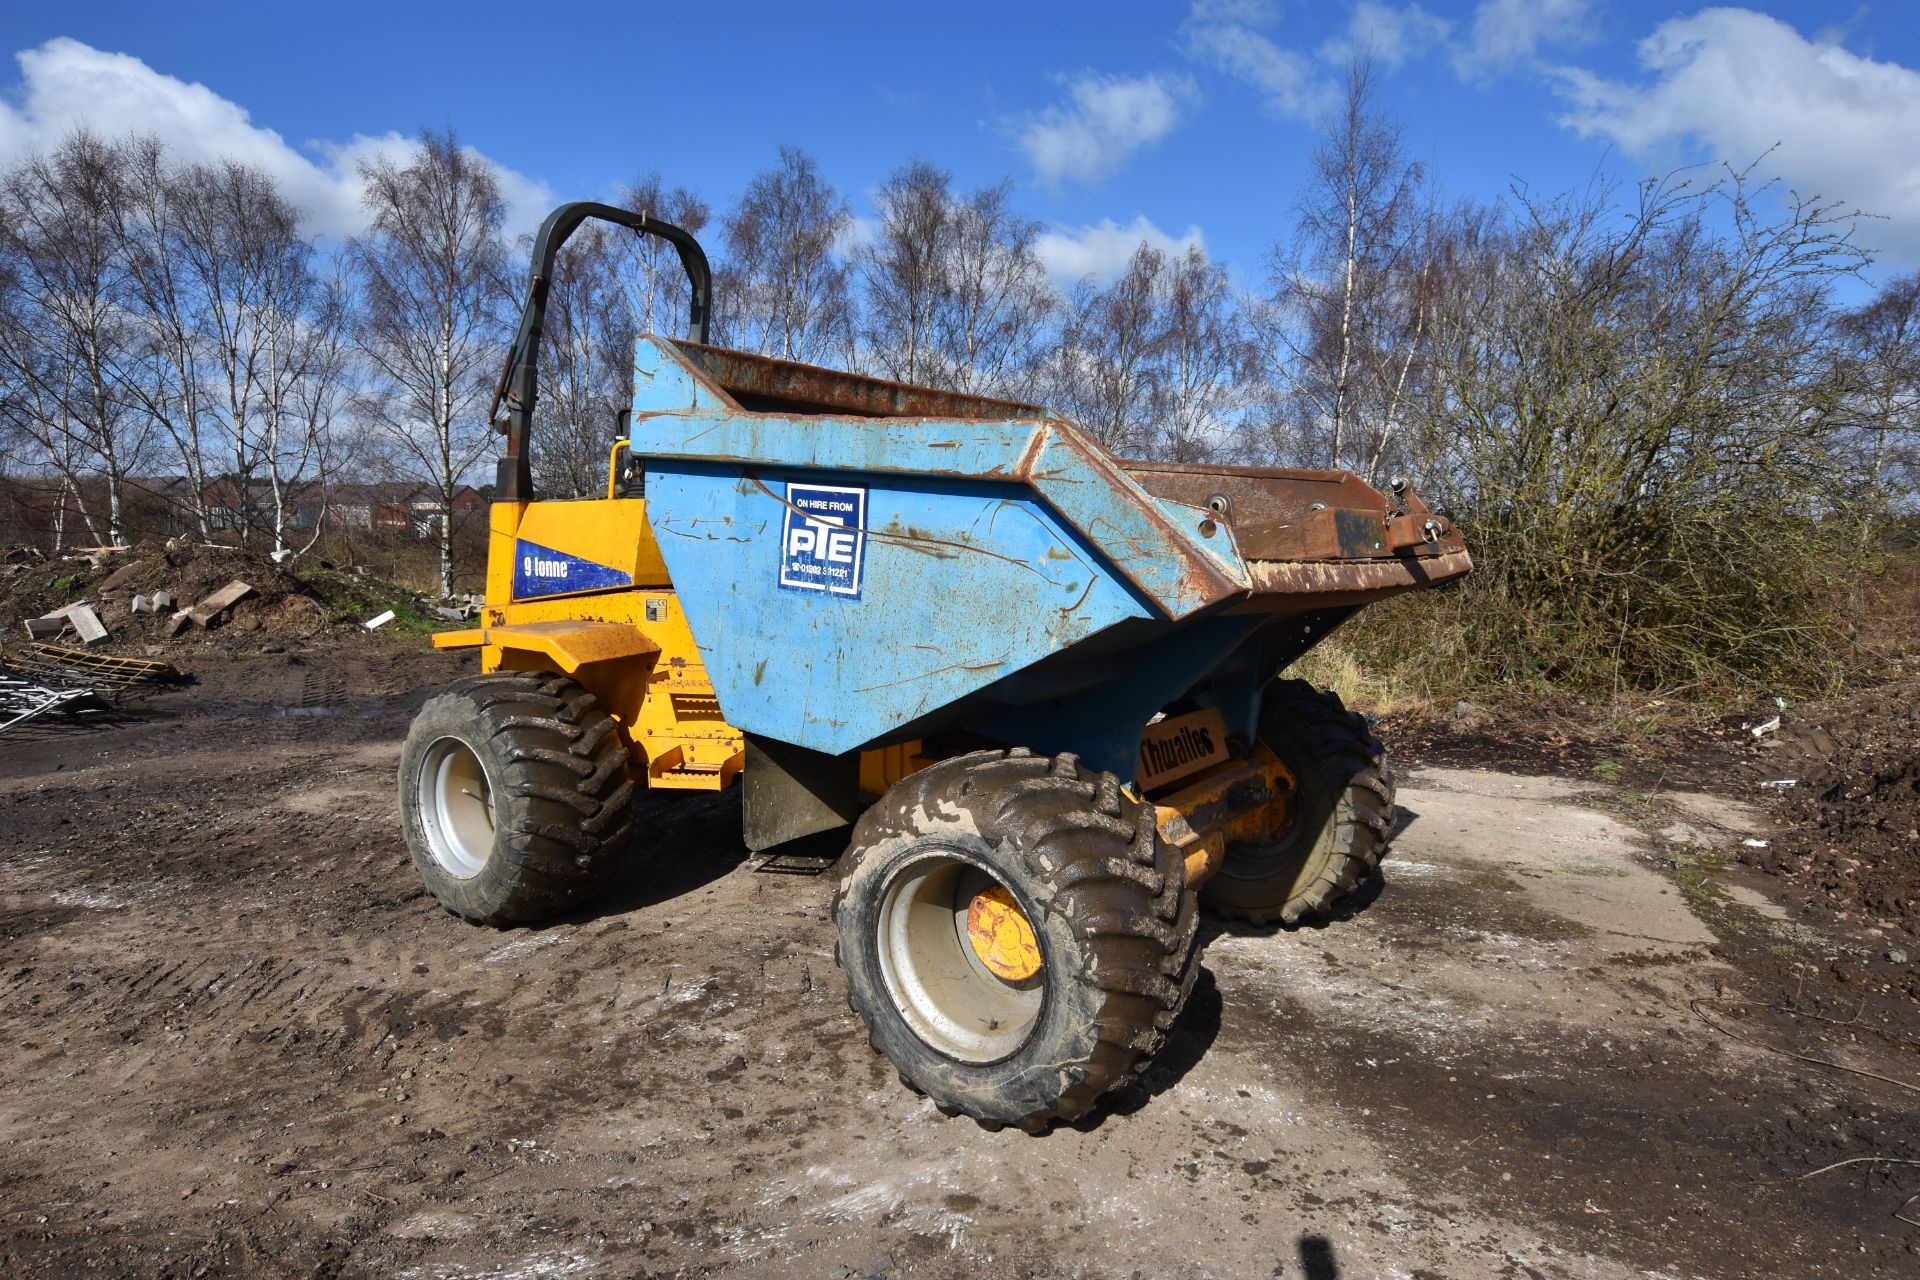 Thwaites 9000kg 4x4 Dumper, Serial No: SLCM290ZZ101A01174, Year of Manufacture: 2001, Indicated